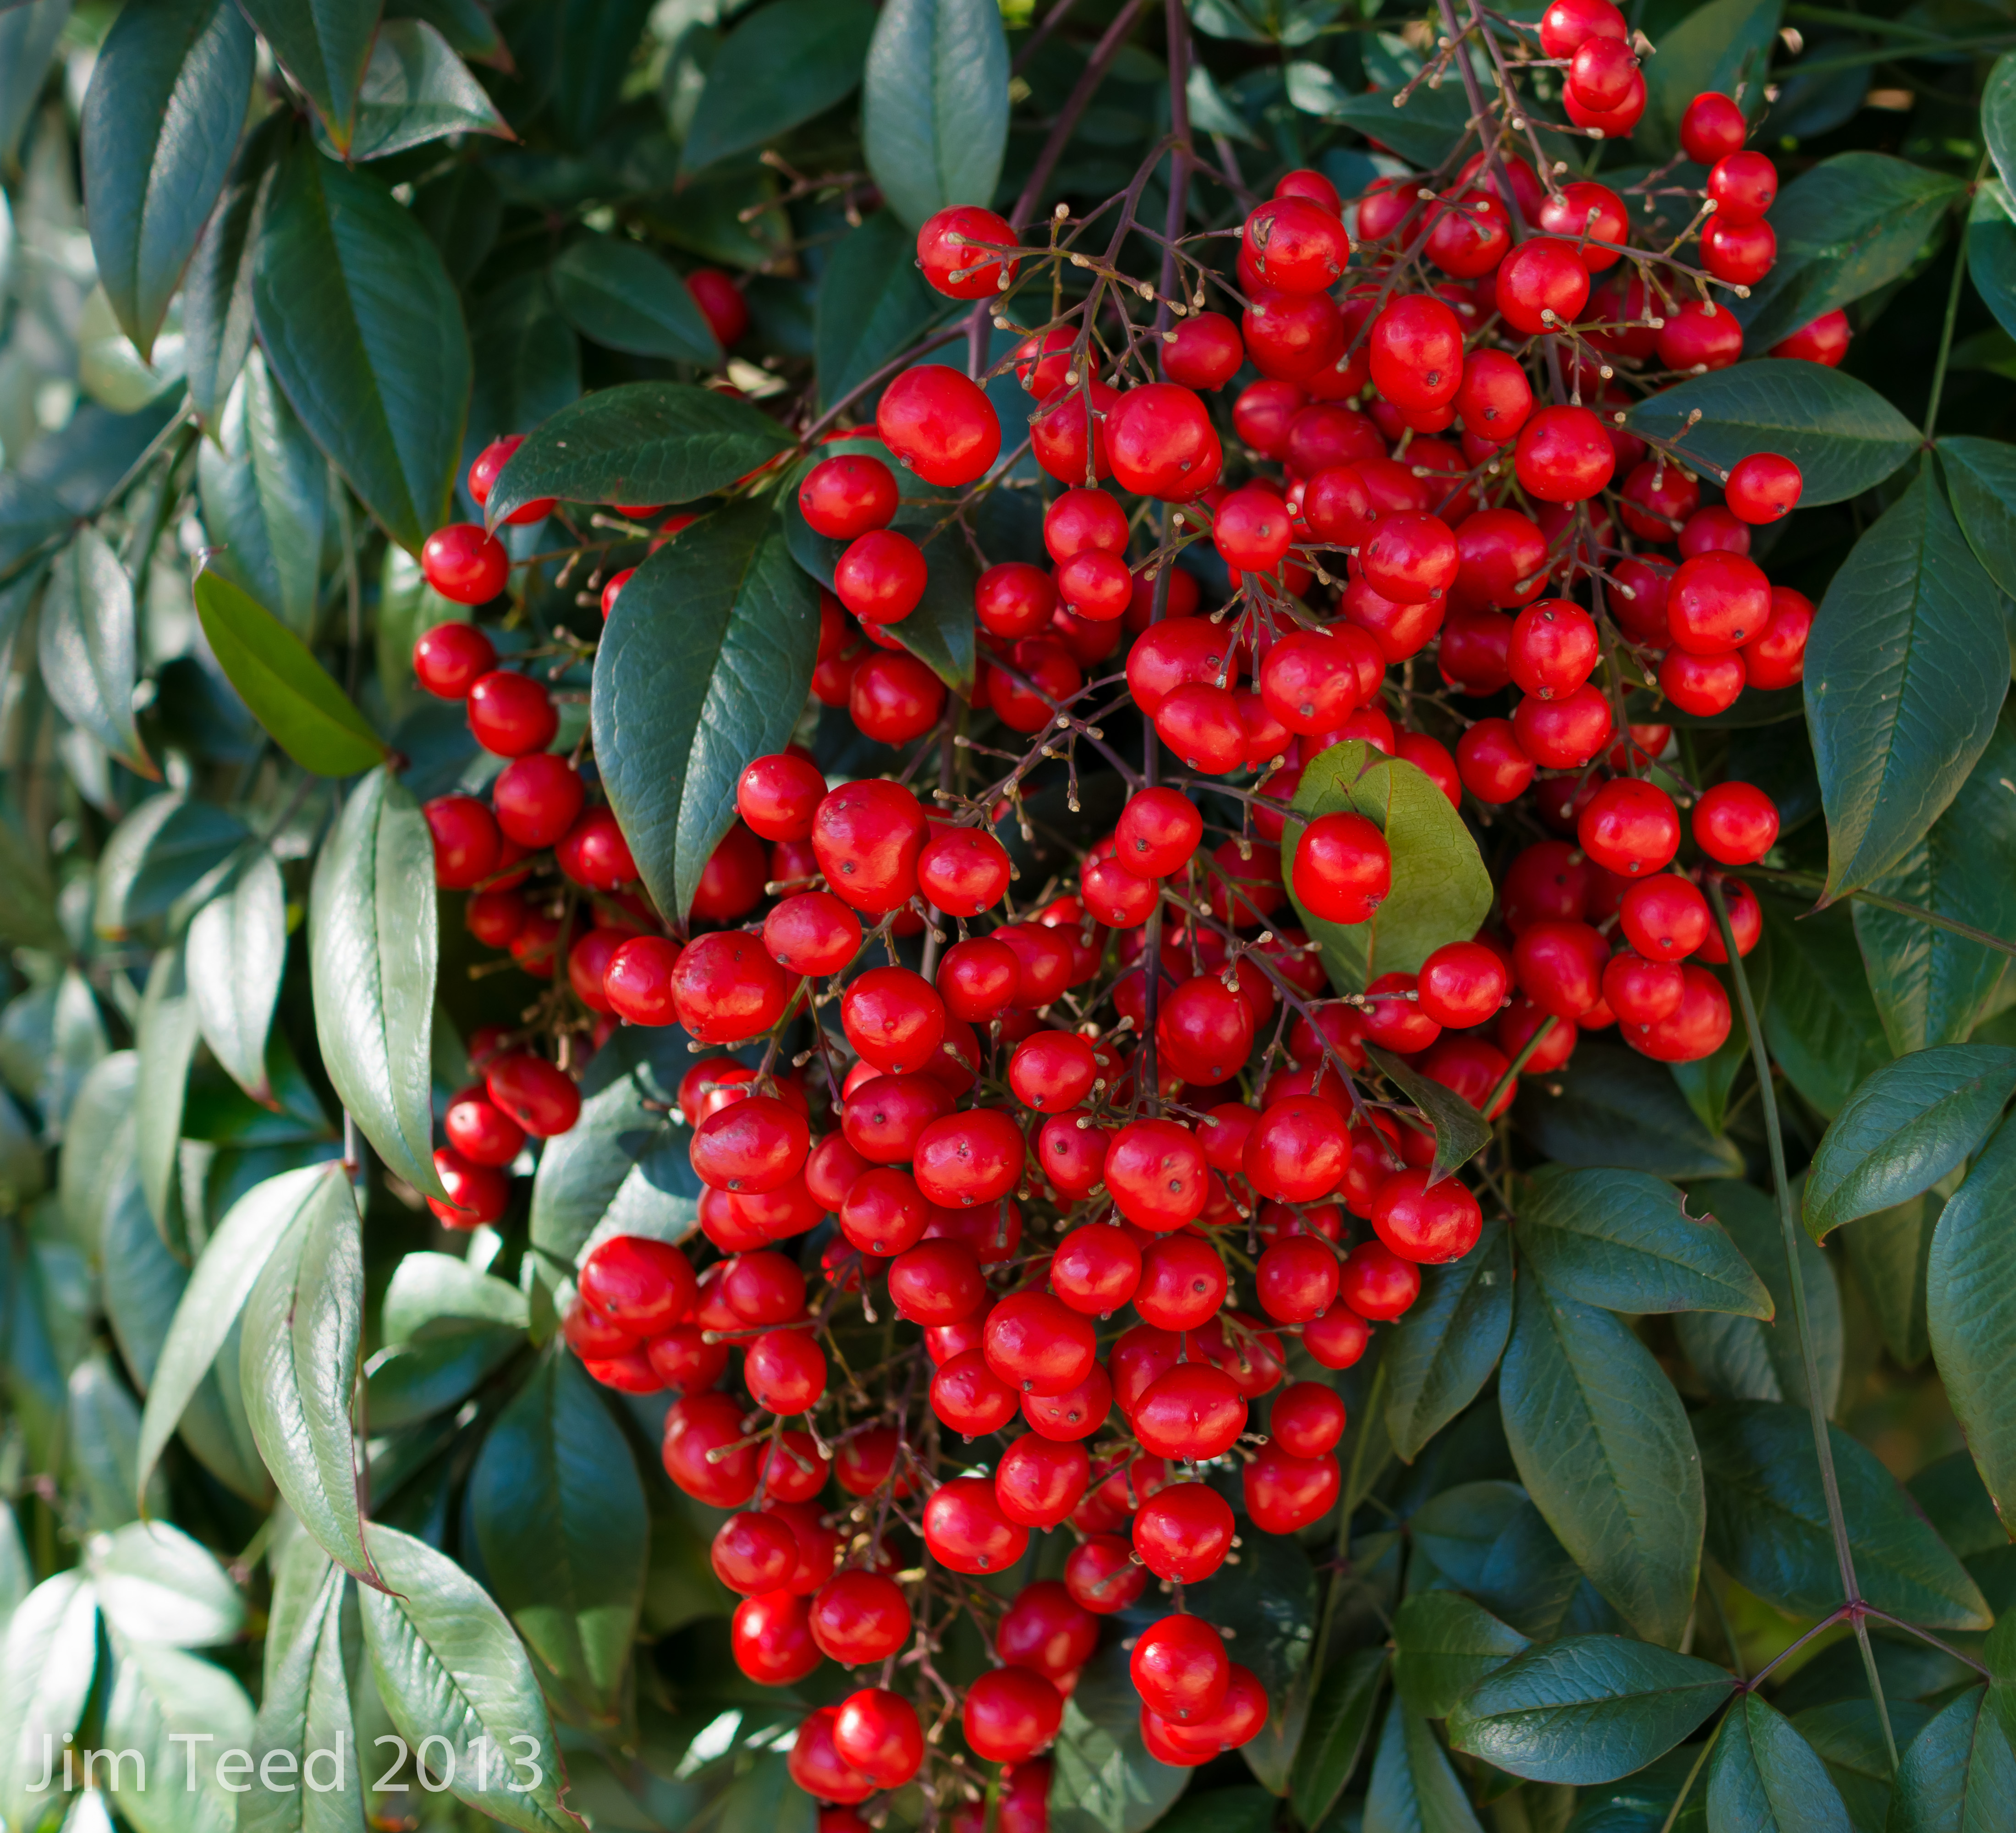 Shrub with red berries and green leaves by jbordons on DeviantArt